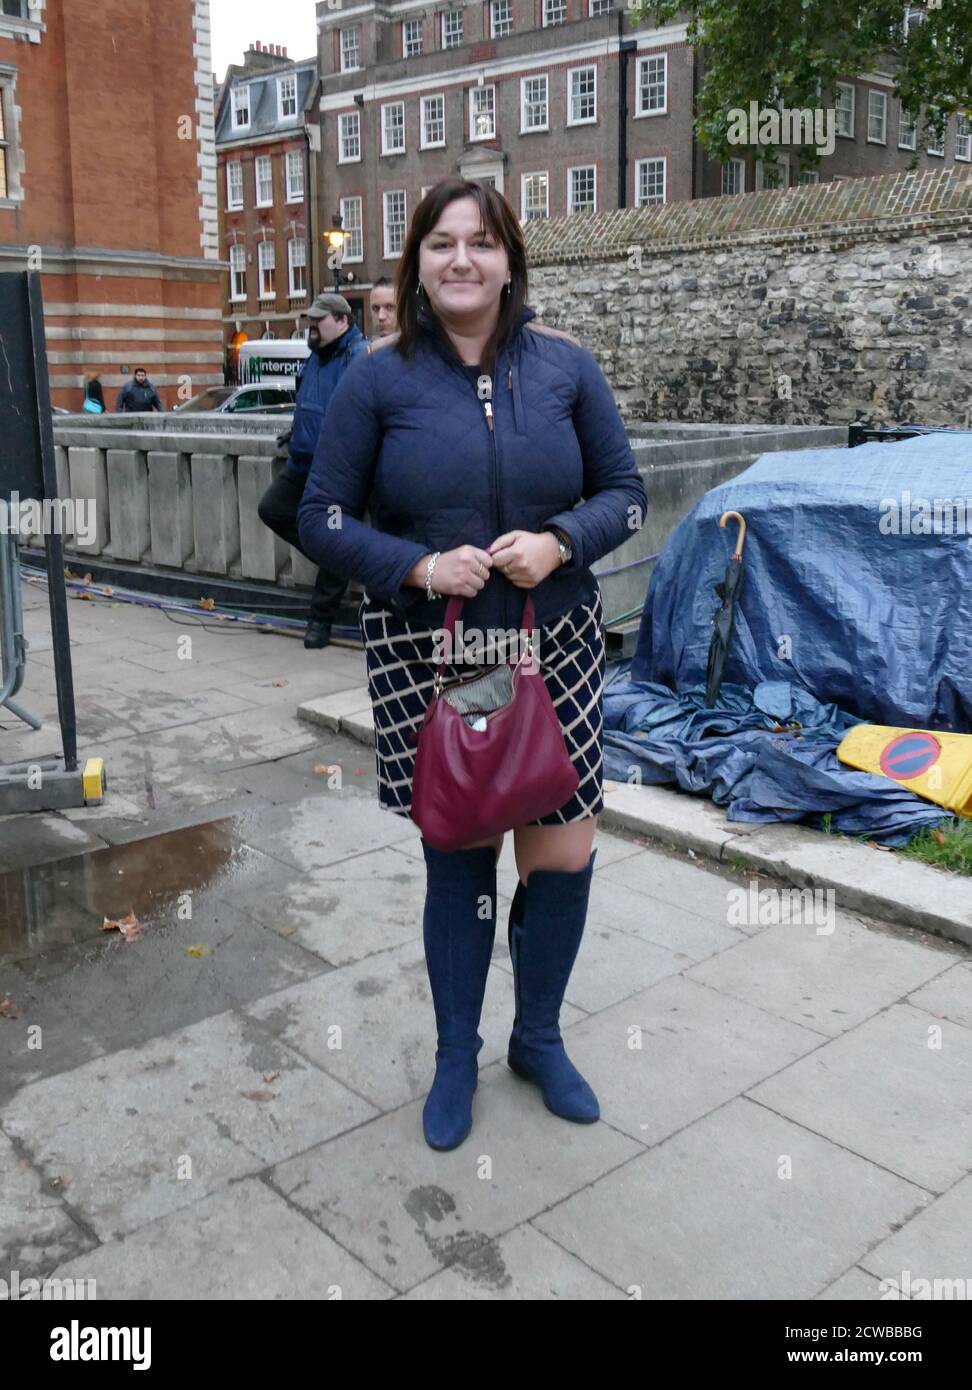 Ruth Smeeth (born 1979), British Labour Party politician who was elected as the Member of Parliament (MP) for Stoke-on-Trent North at the 2015 general election Stock Photo